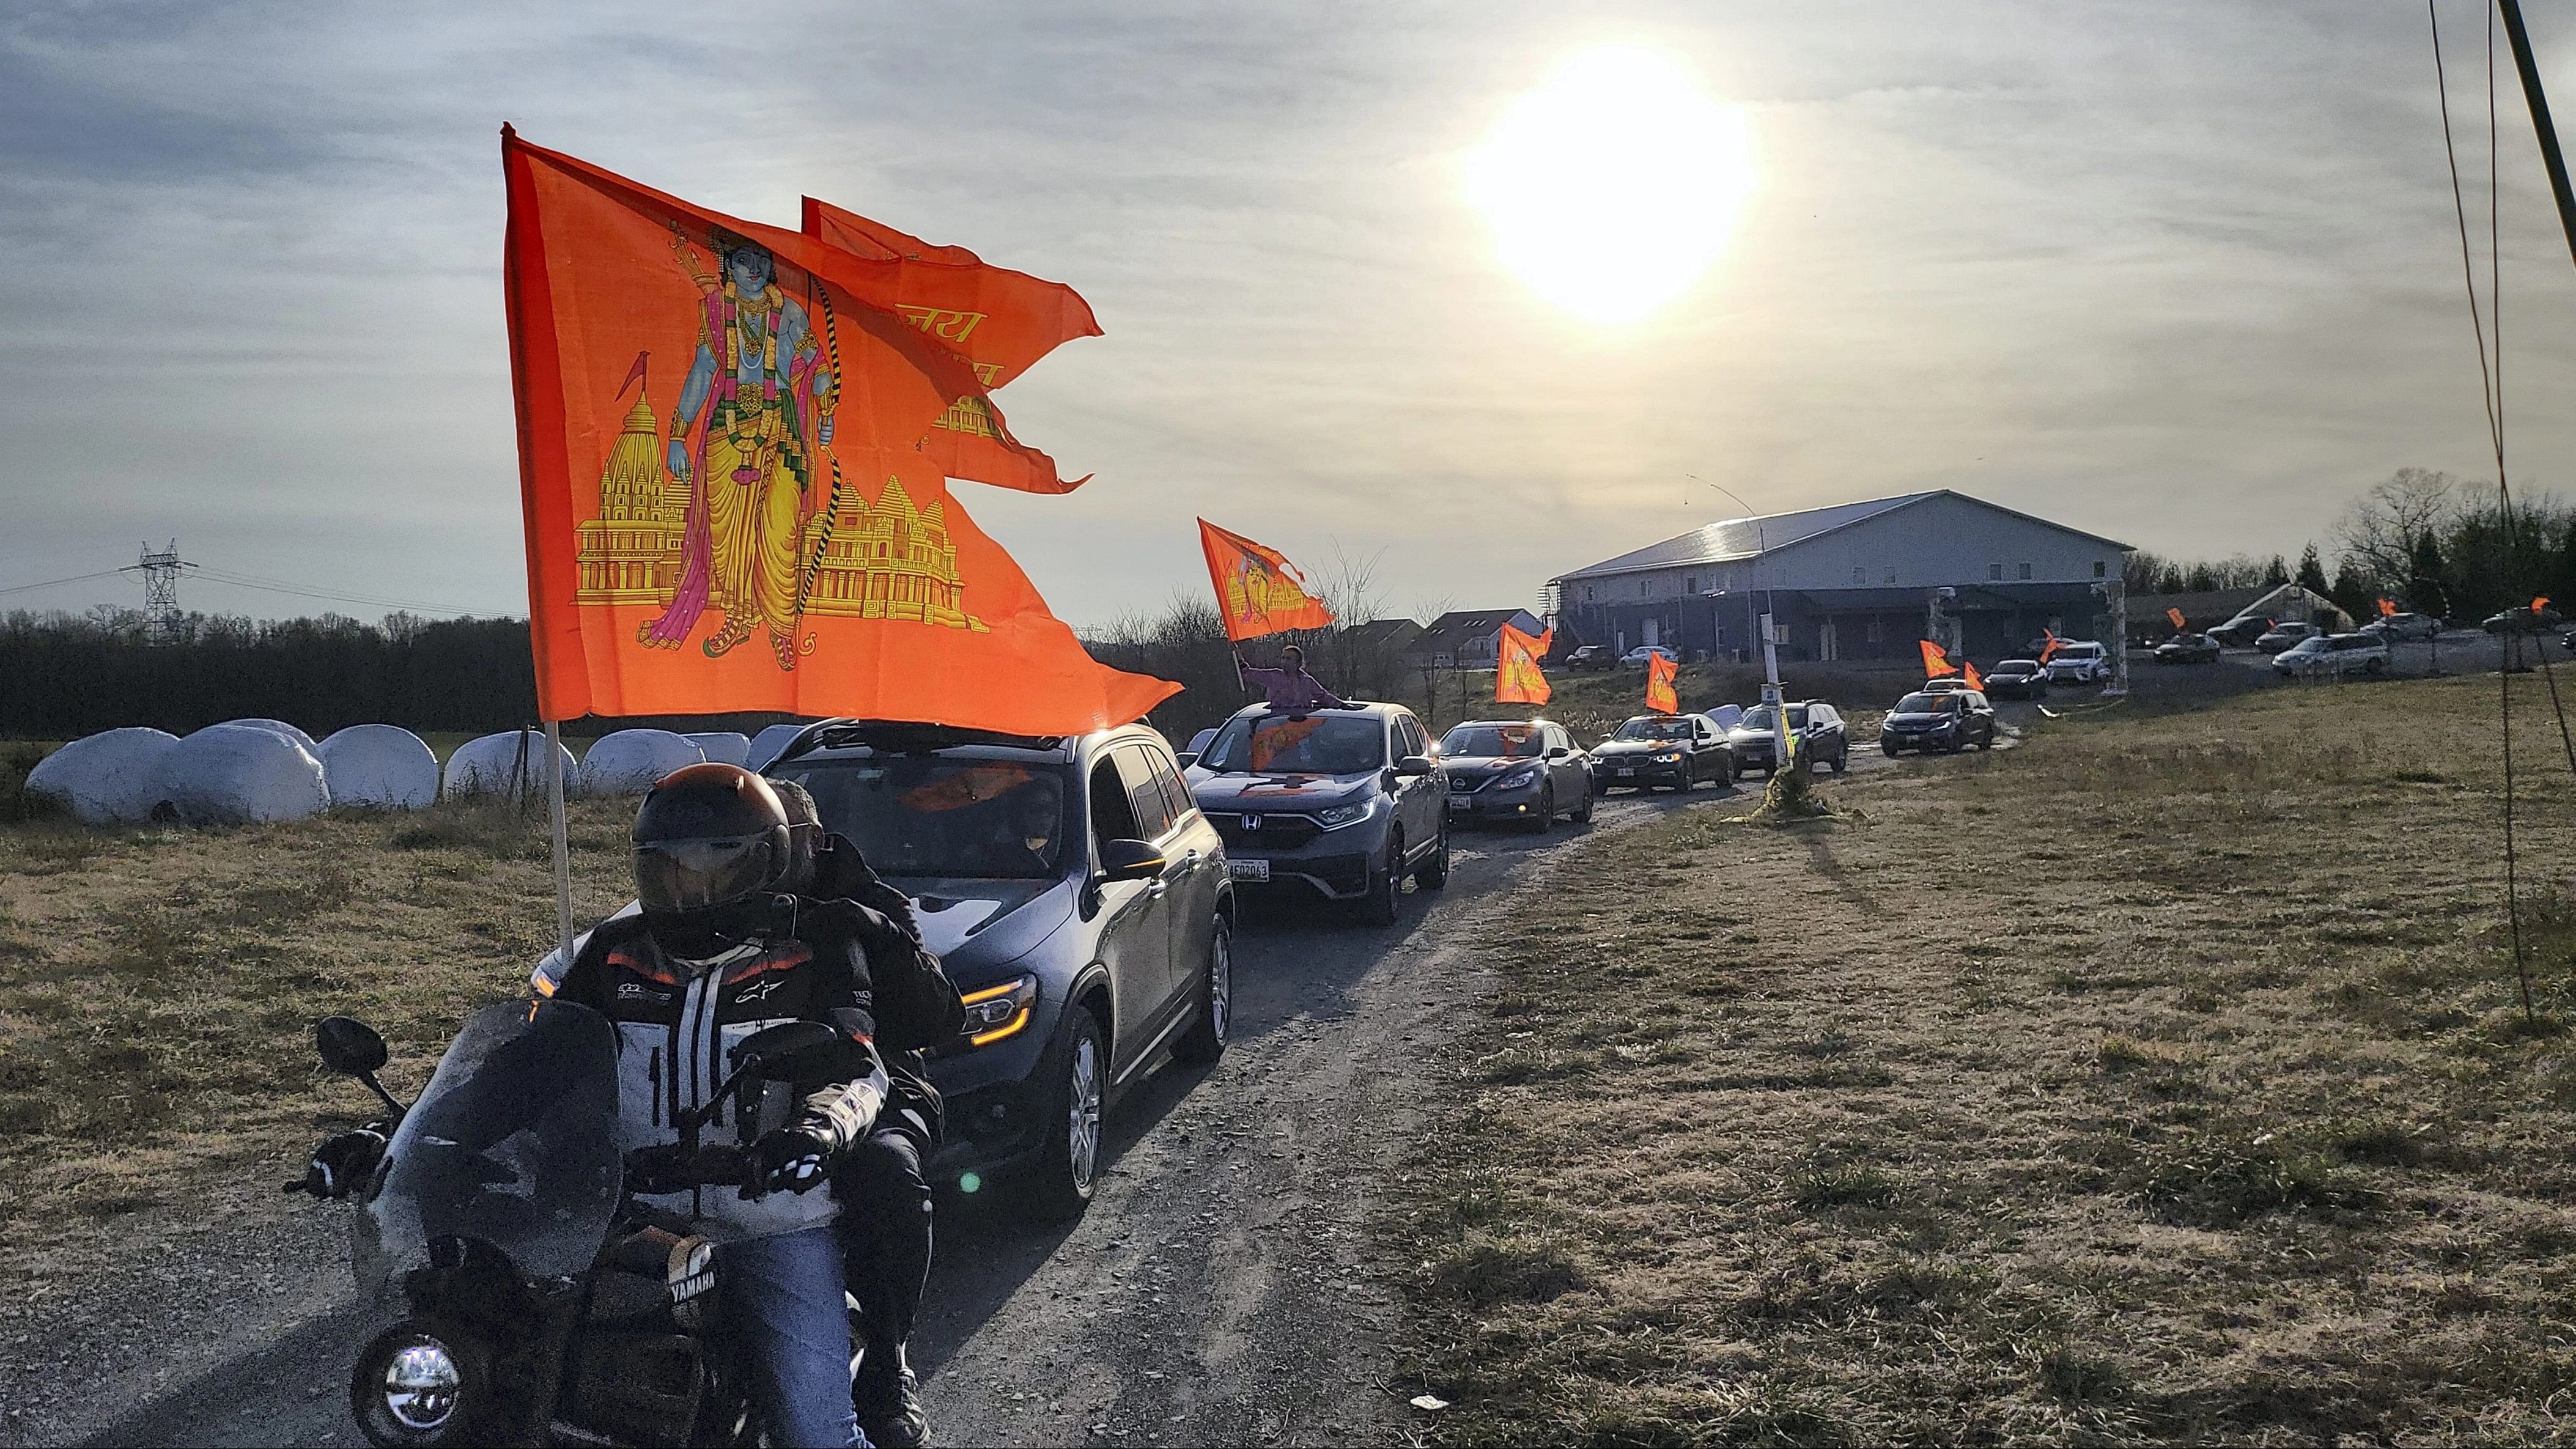 <div class="paragraphs"><p>Members of the Hindu American community took part in a car rally in a Maryland suburb of Washington, before the inauguration Ram Mandir in India.</p></div>